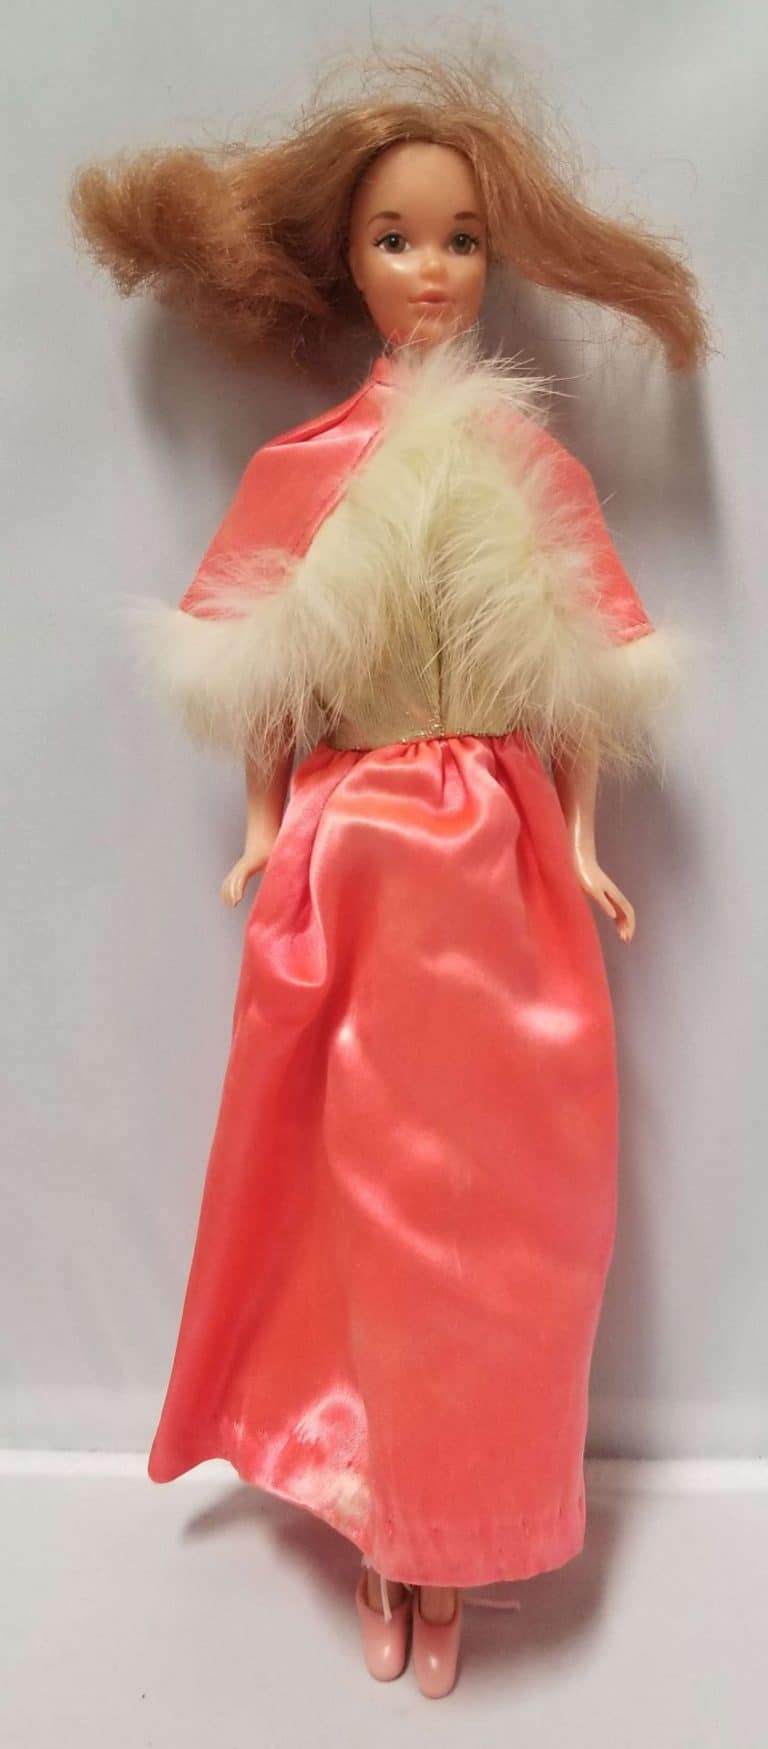 Barbie Doll with brown hair, wearing a coral dress with a fur-lined cape.